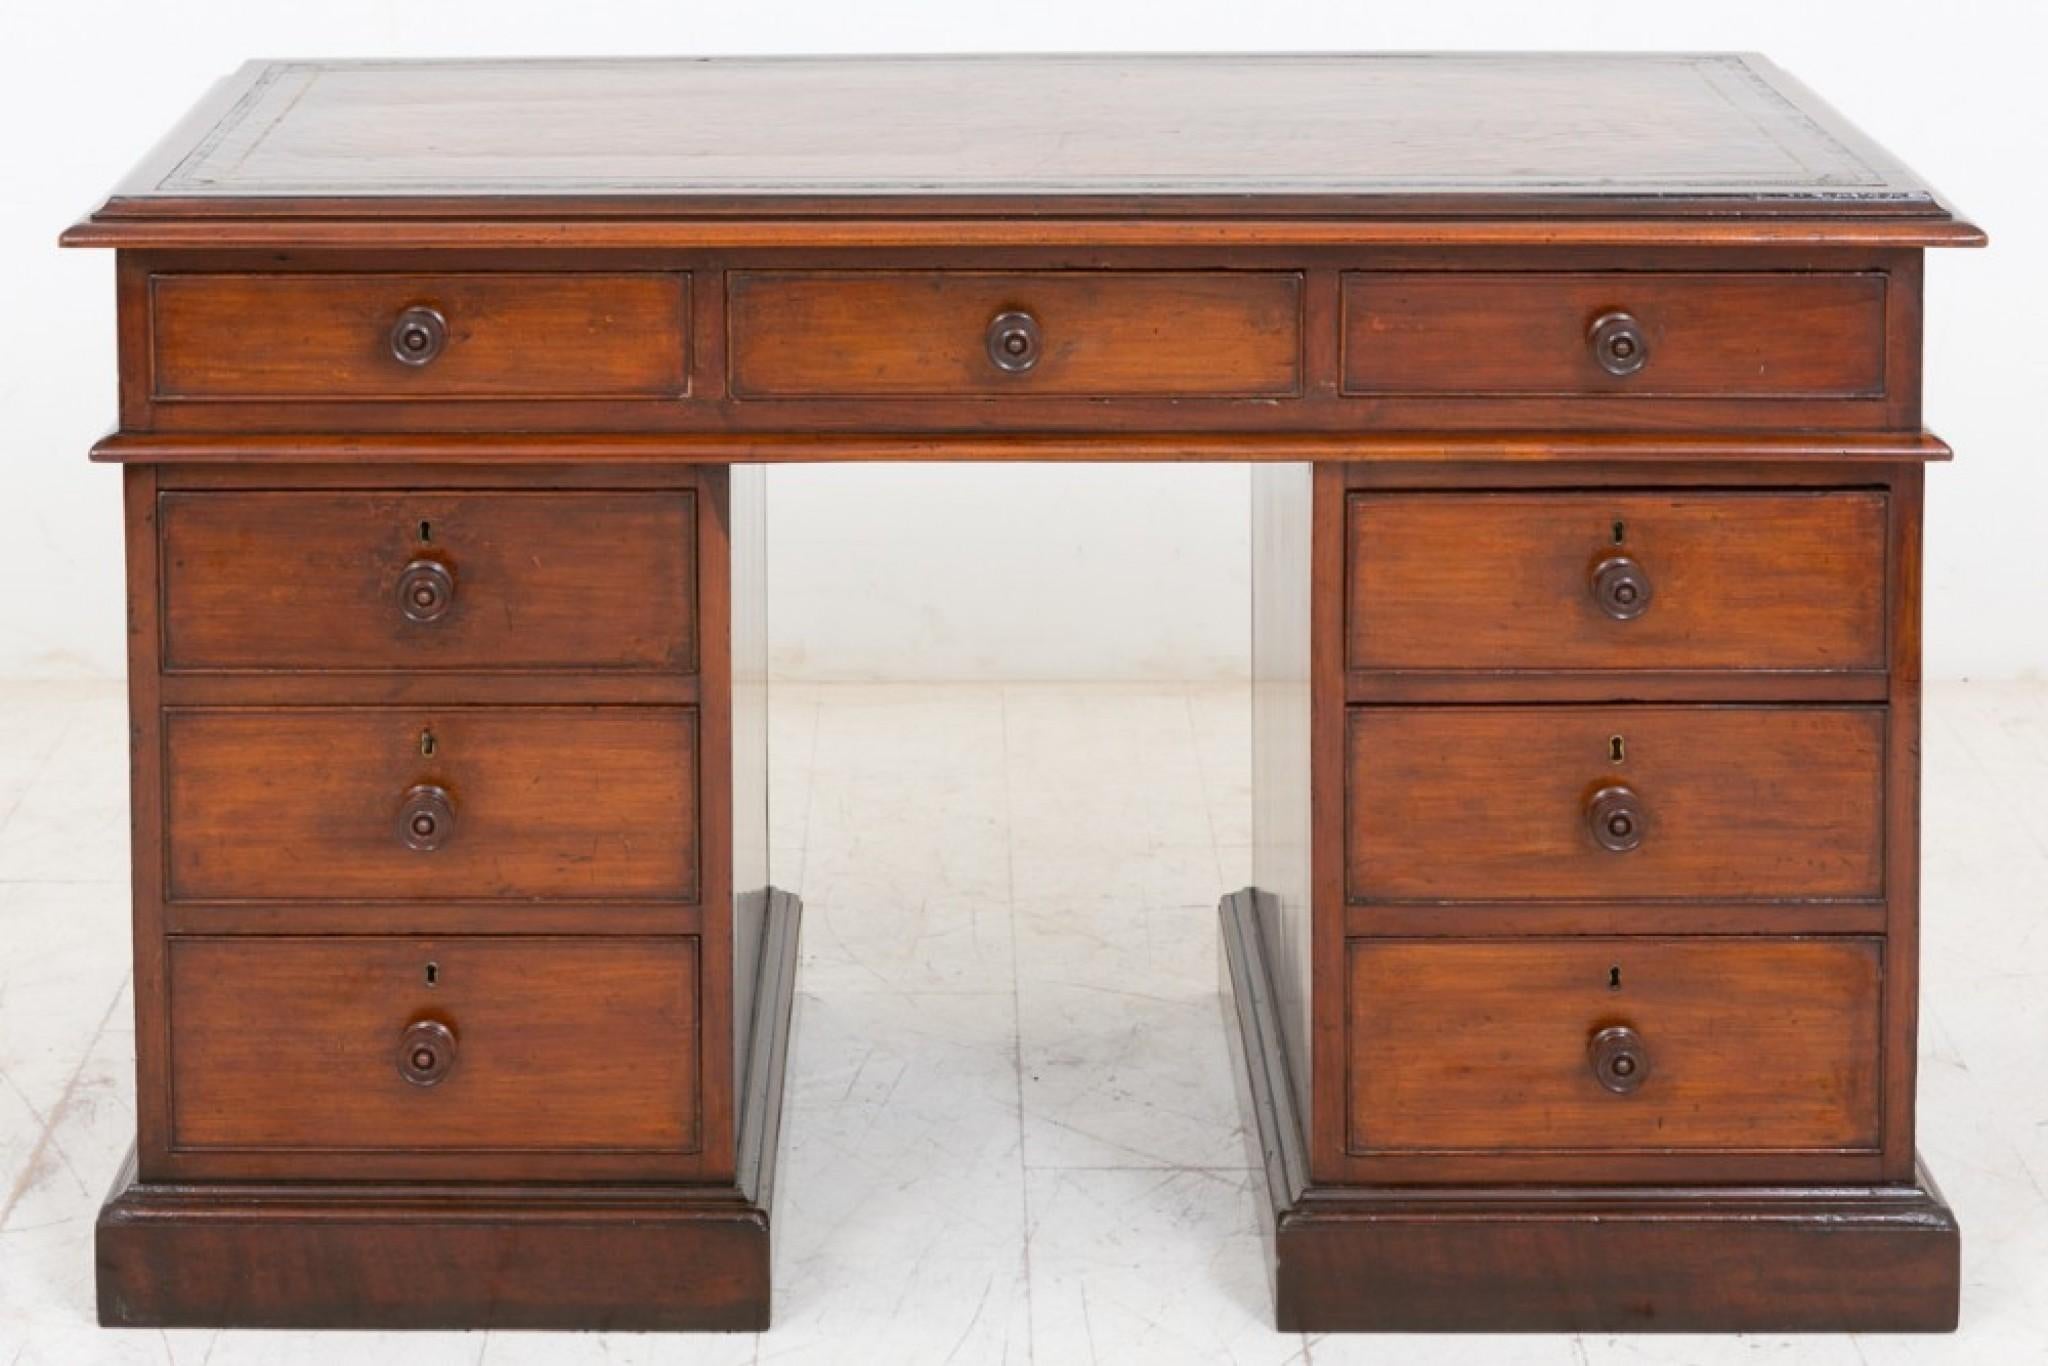 Victorian Pedestal Desk Antique Mahogany Writing Table, 1850 For Sale 3